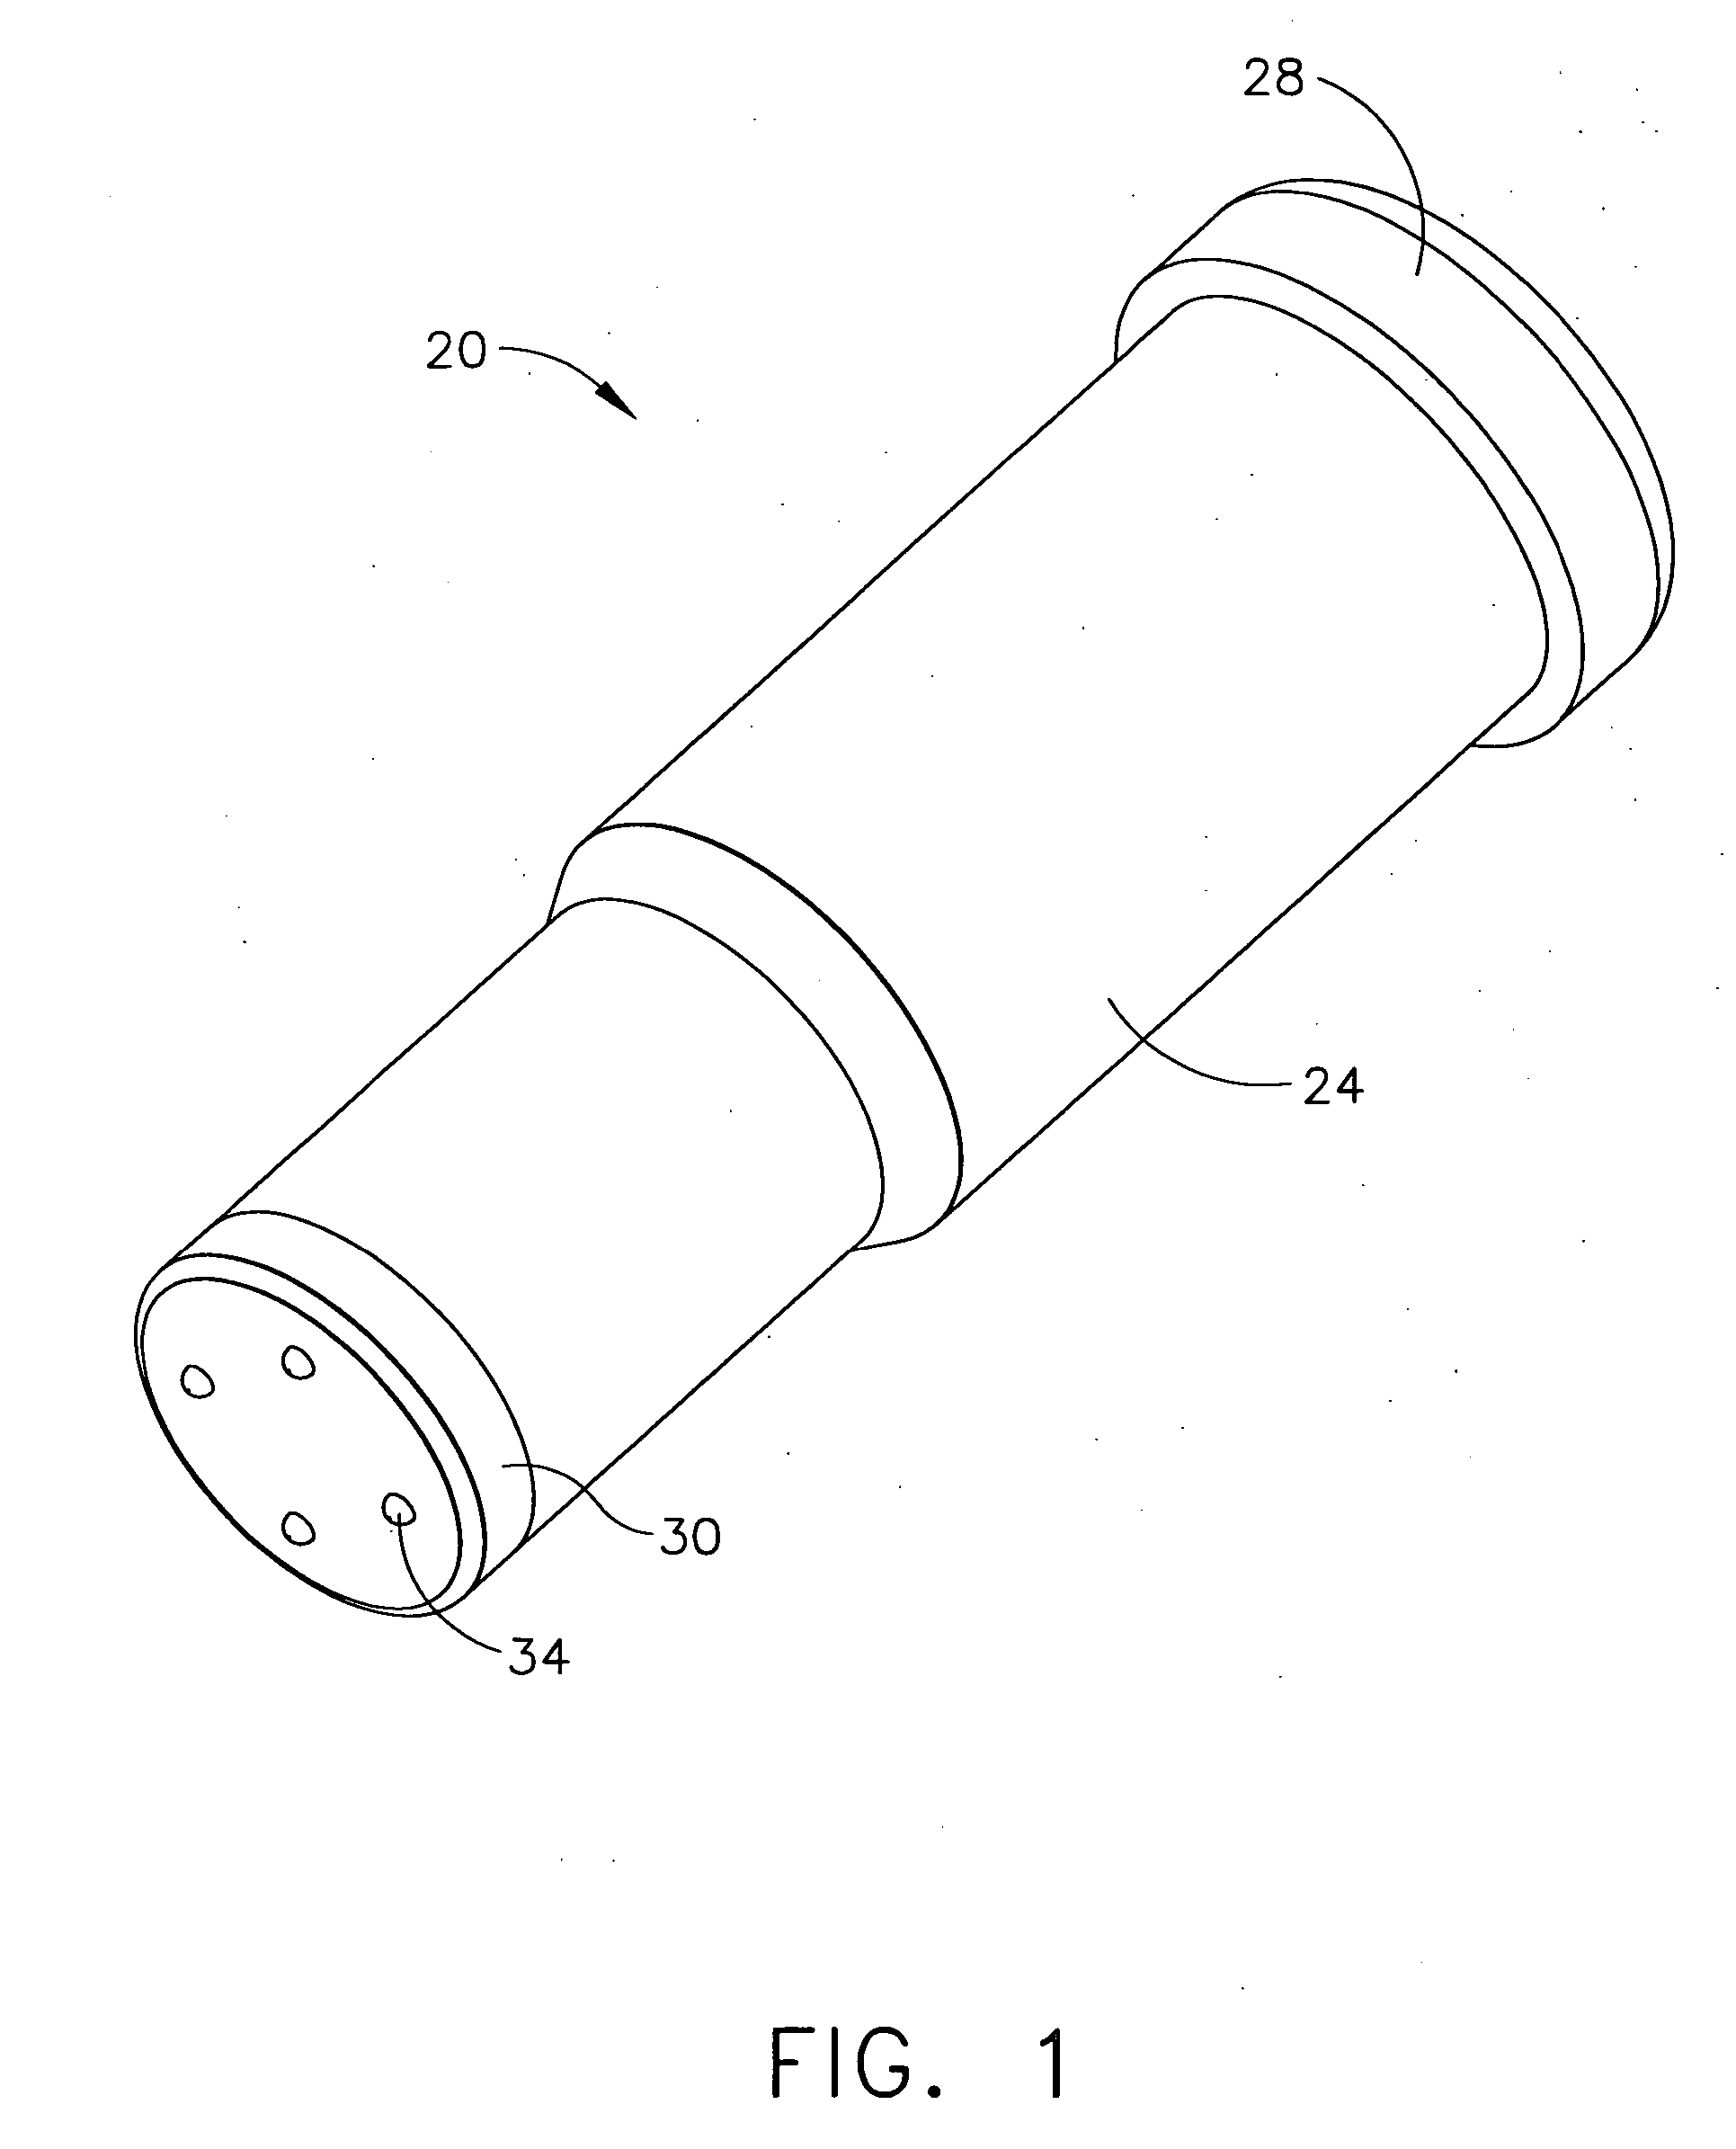 Method for making a needle-free jet injection drug delivery device